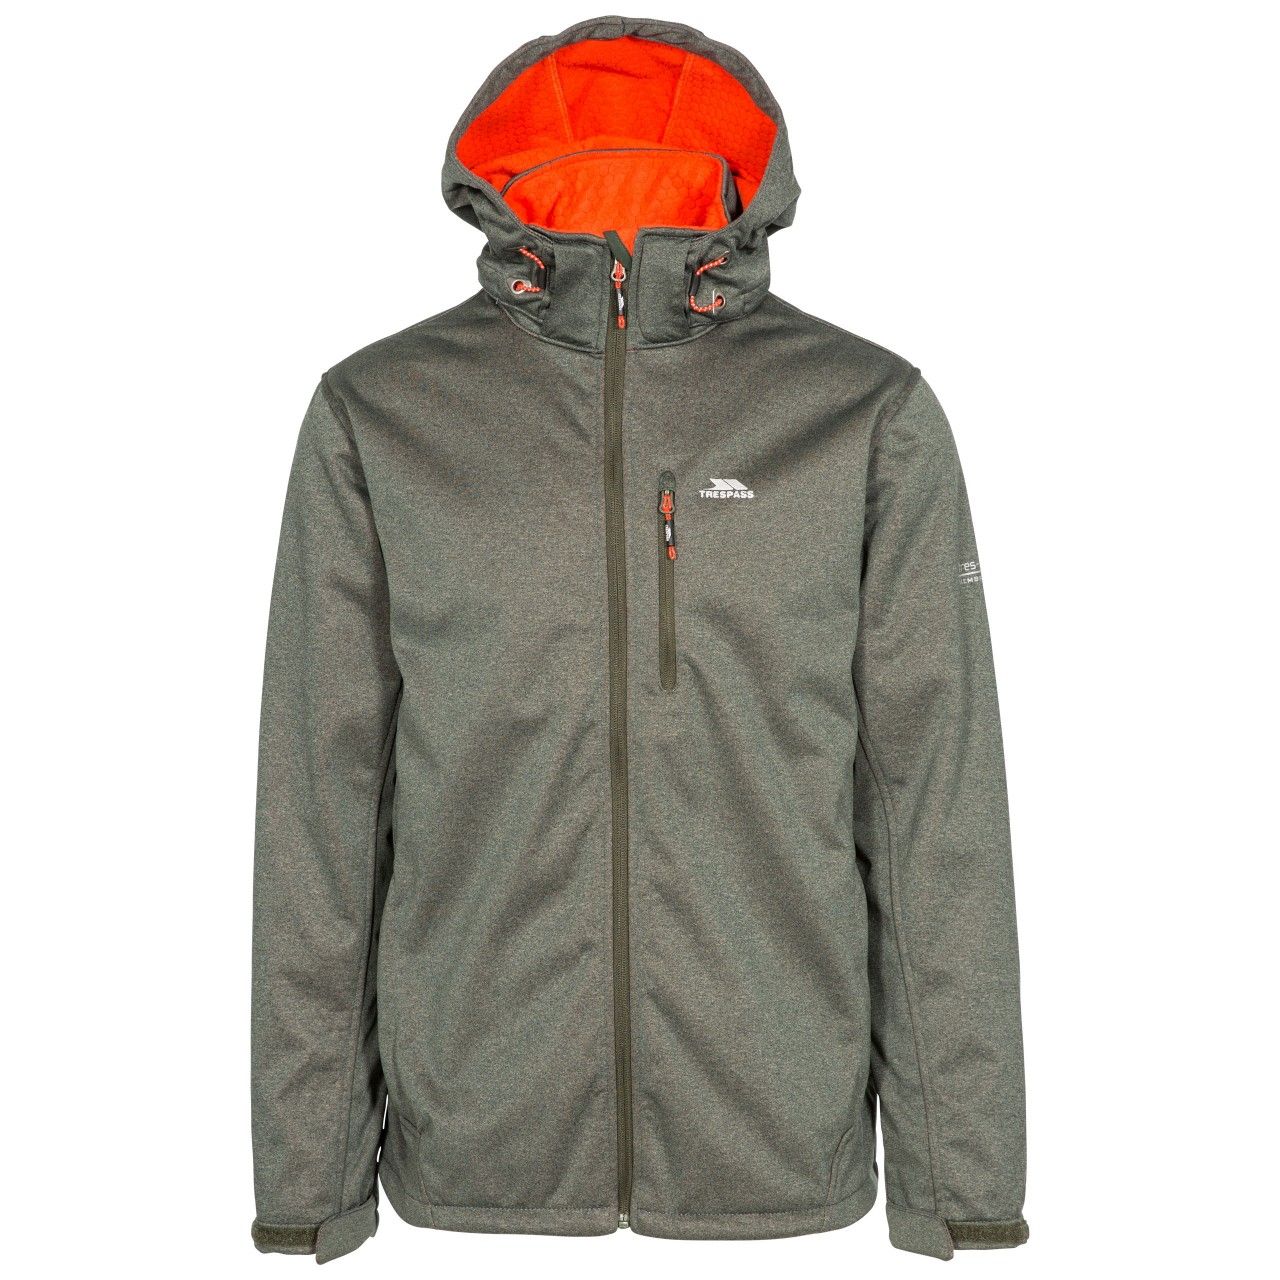 Adjustable zip off hood. Low profile zips. 3 zip pockets. Flat cuff with tab adjuster. Drawcord at hem. 100% polyester.